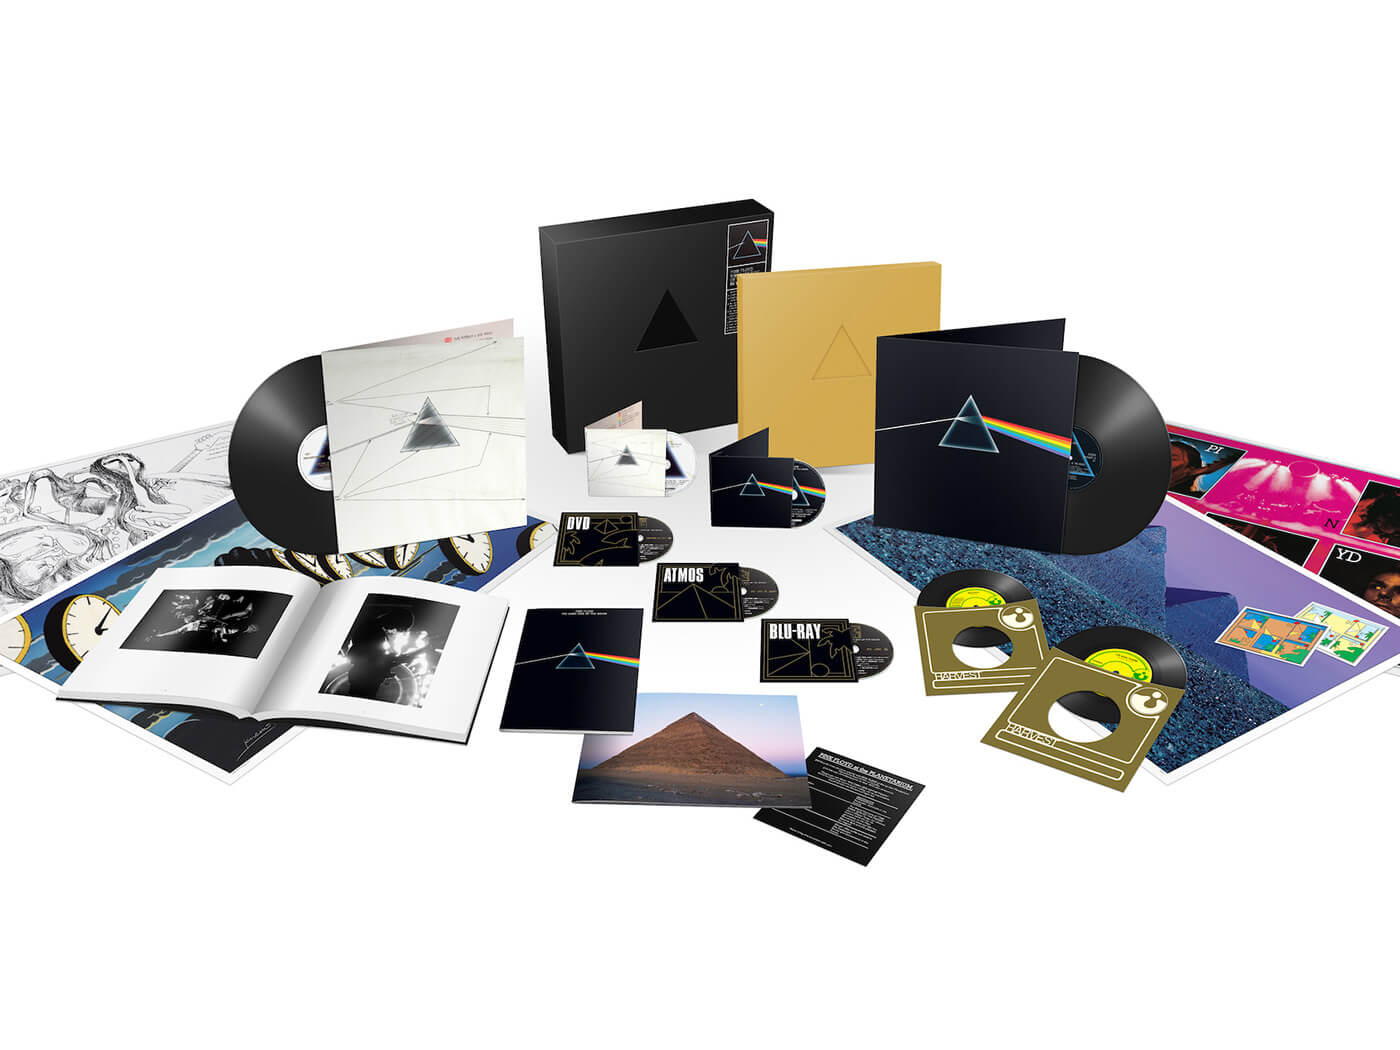 Pink Floyd announce The Dark Side Of The Moon 50th anniversary reissue